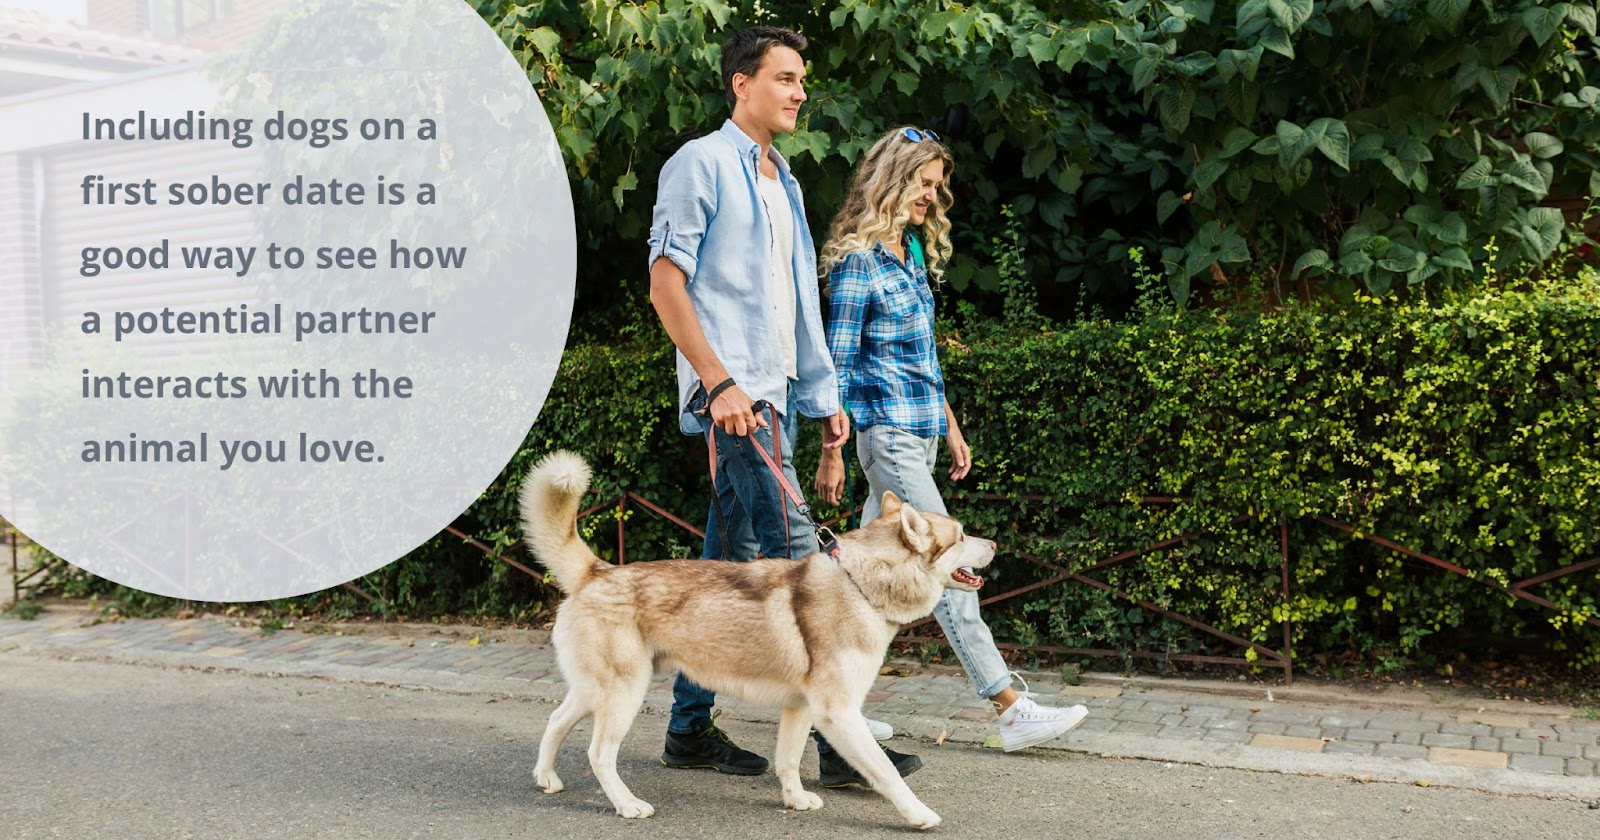 including dogs on a first sober date is a good way to see how a potential partner interacts with the animal you love